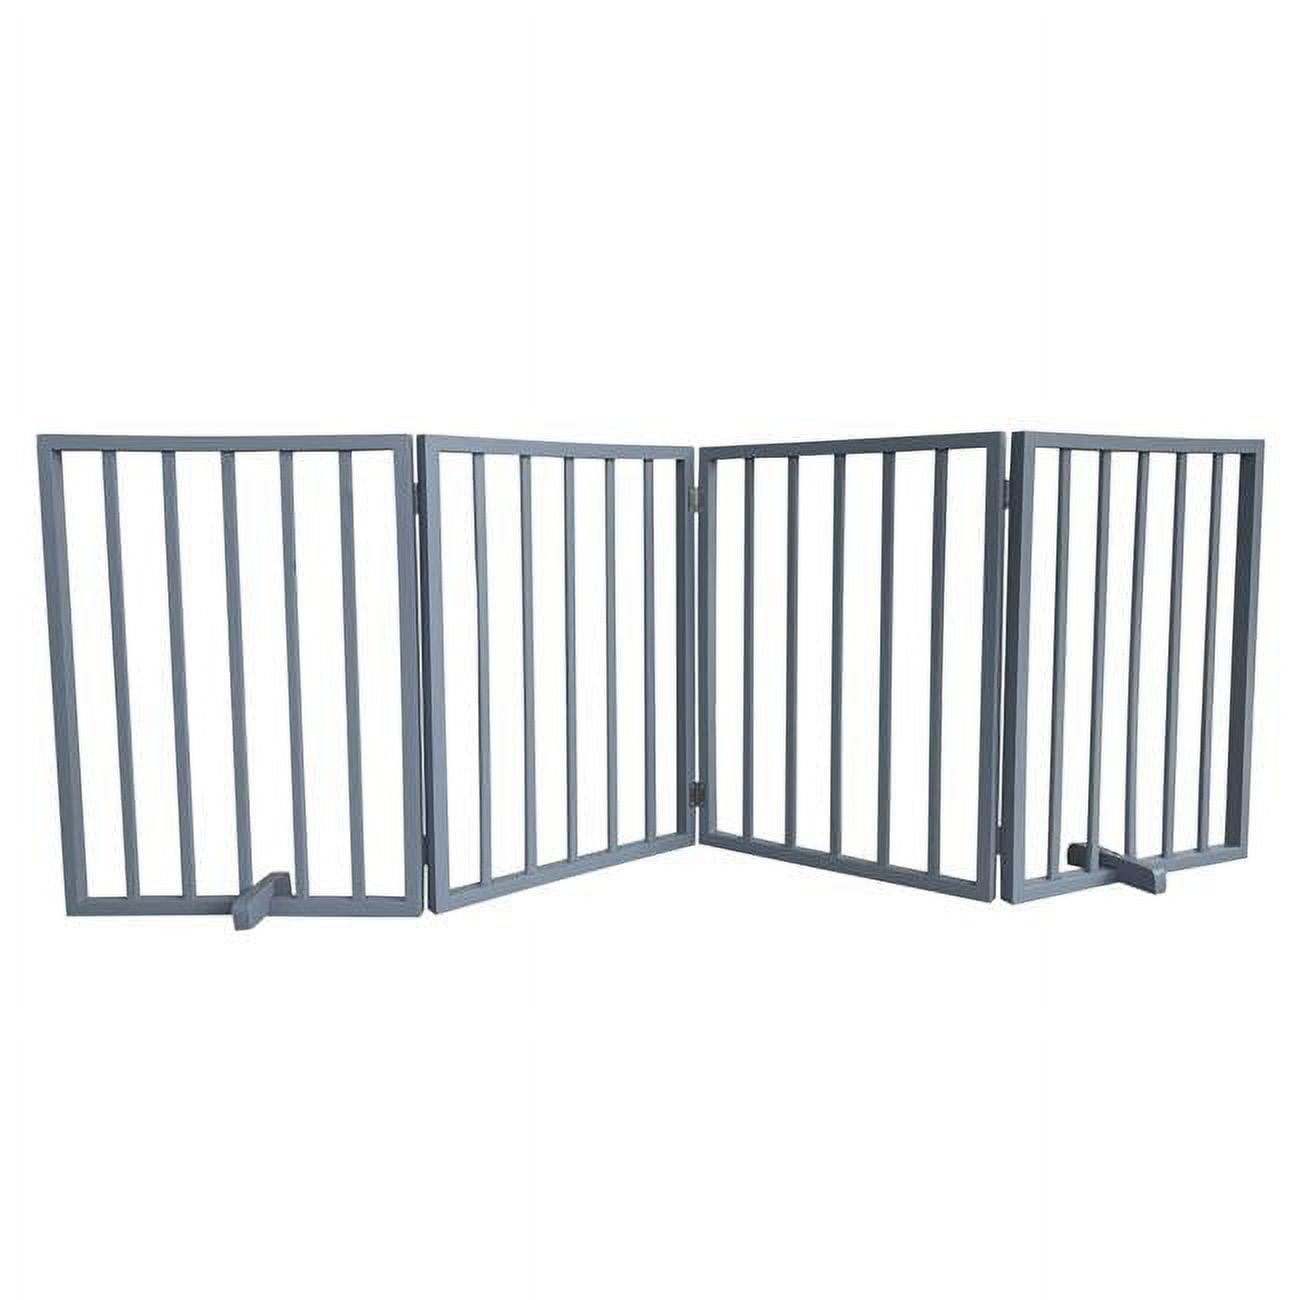 Picture of AmeriHome WFPGG4 72 in. Freestanding 4-Panel Folding Wood Pet Gate - Grey